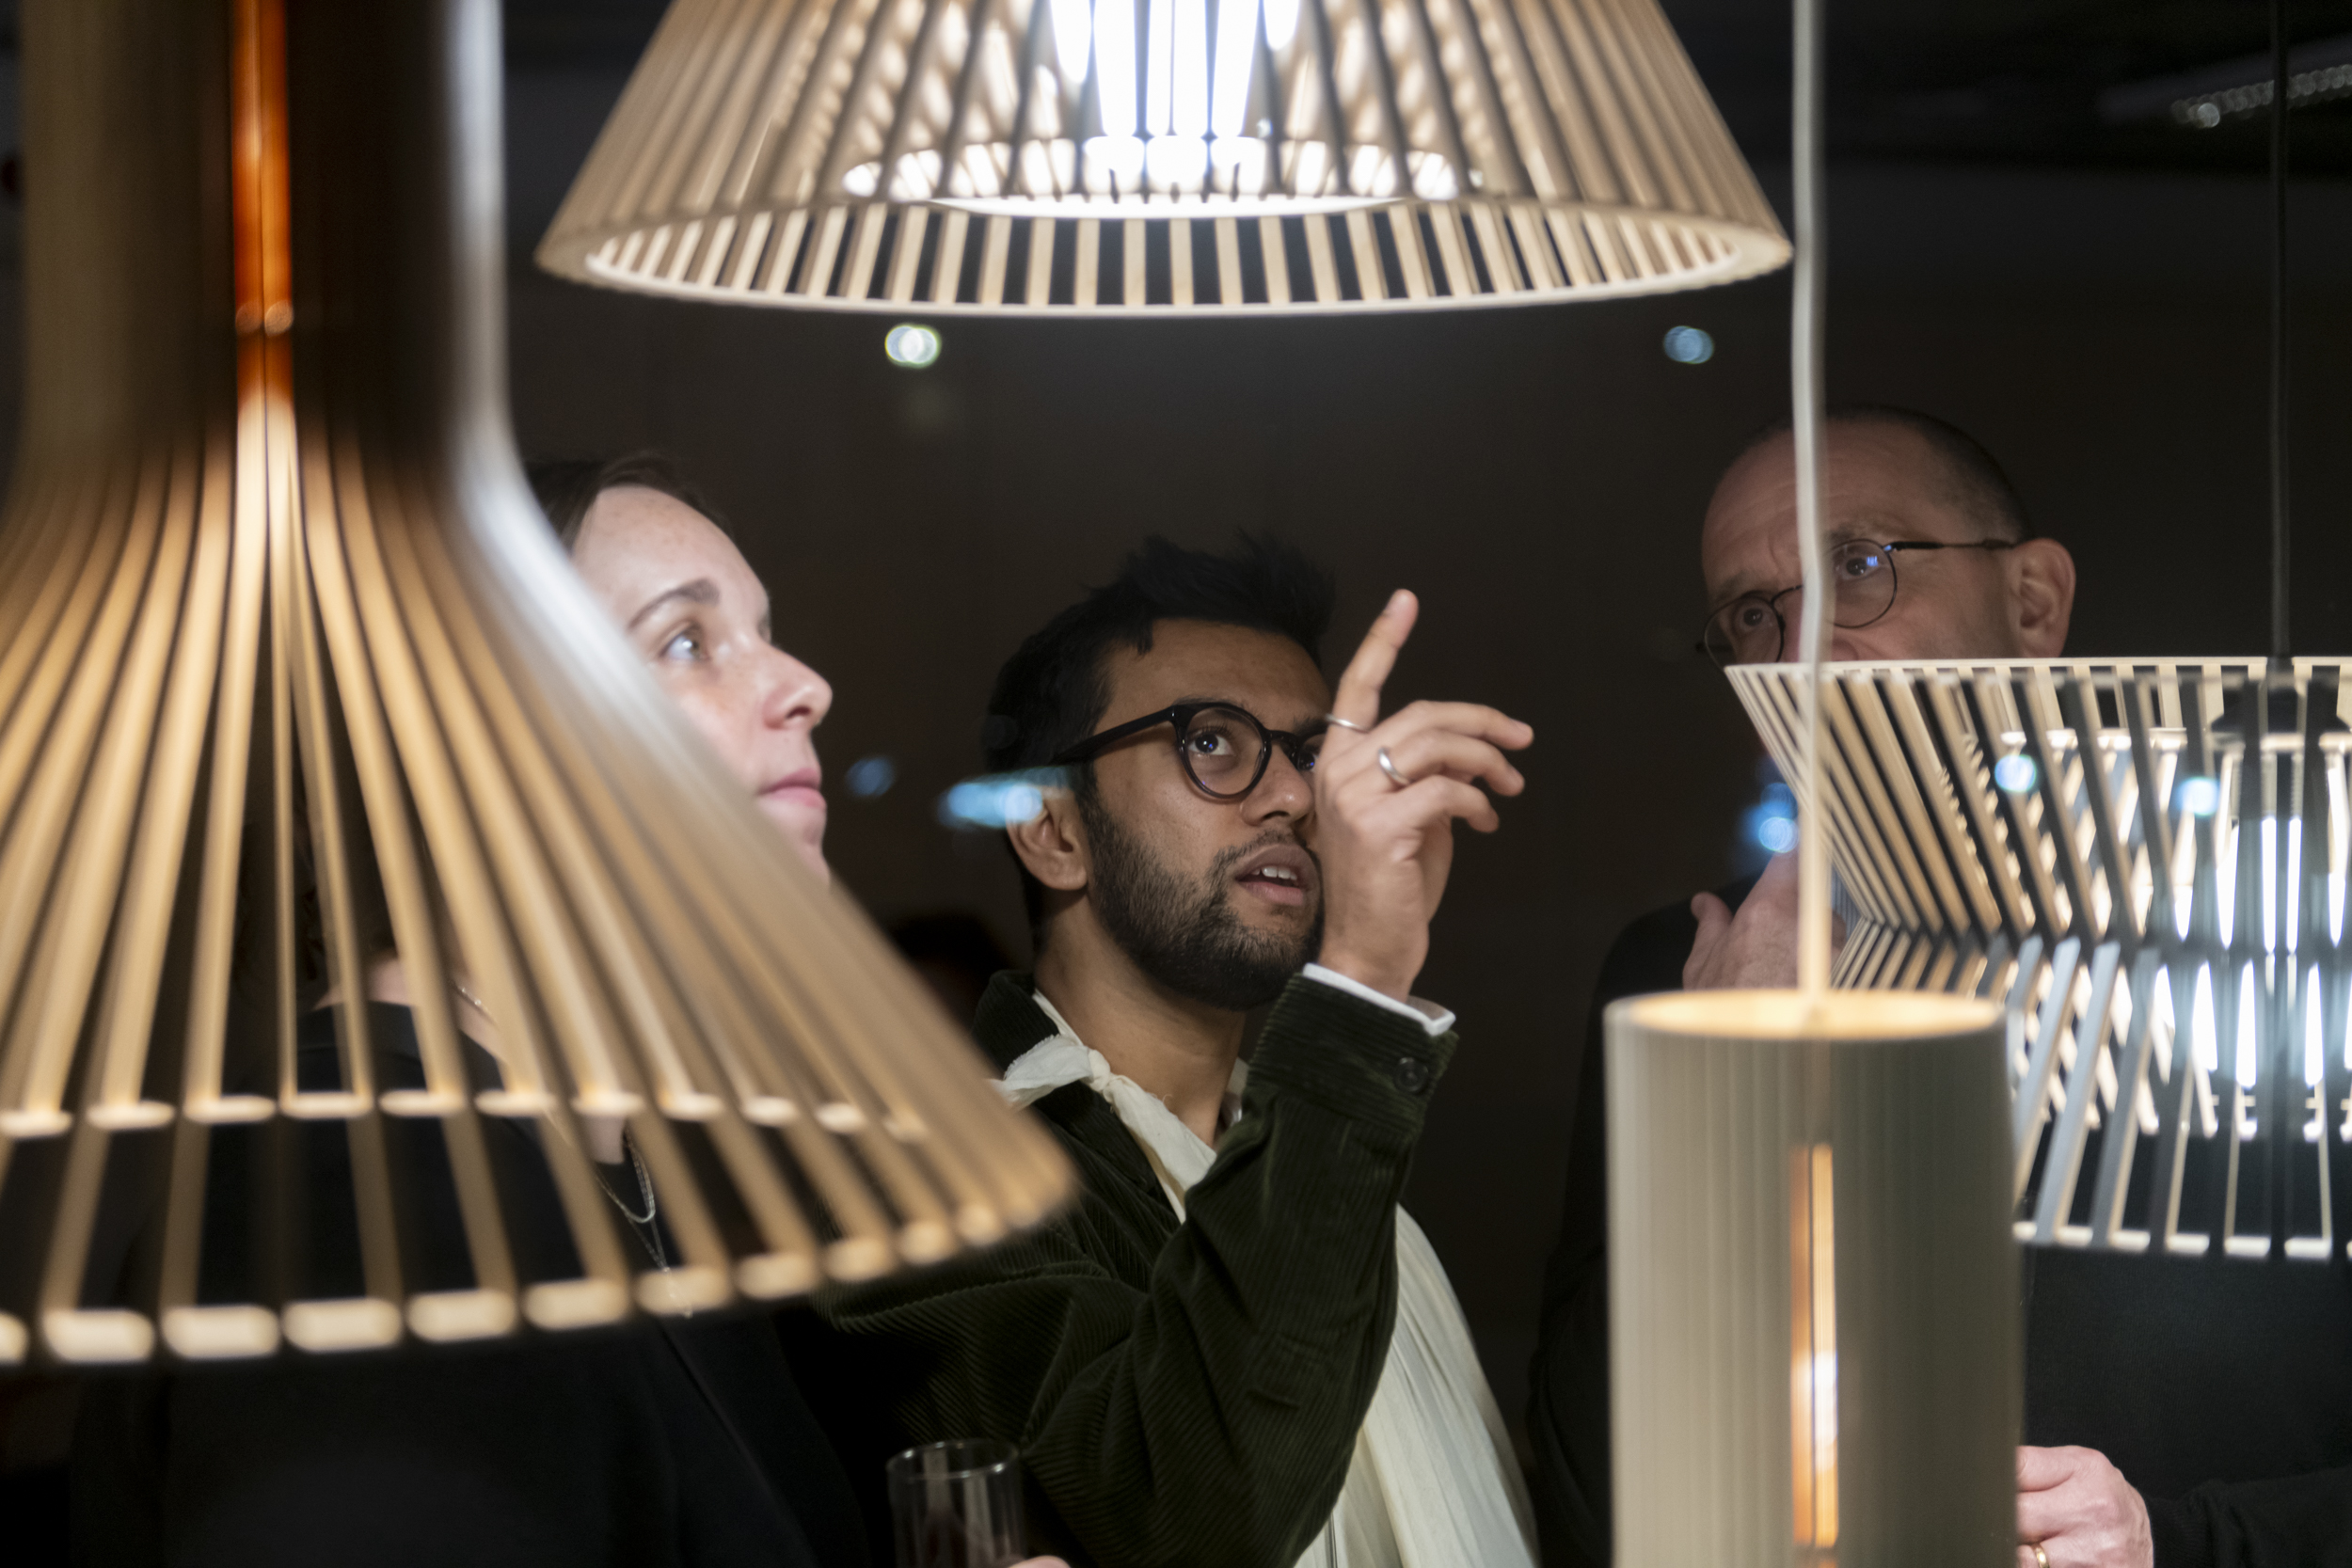 A woman and two men looking upwards at pendant lamps. The man in the middle points the uppermost lamp.